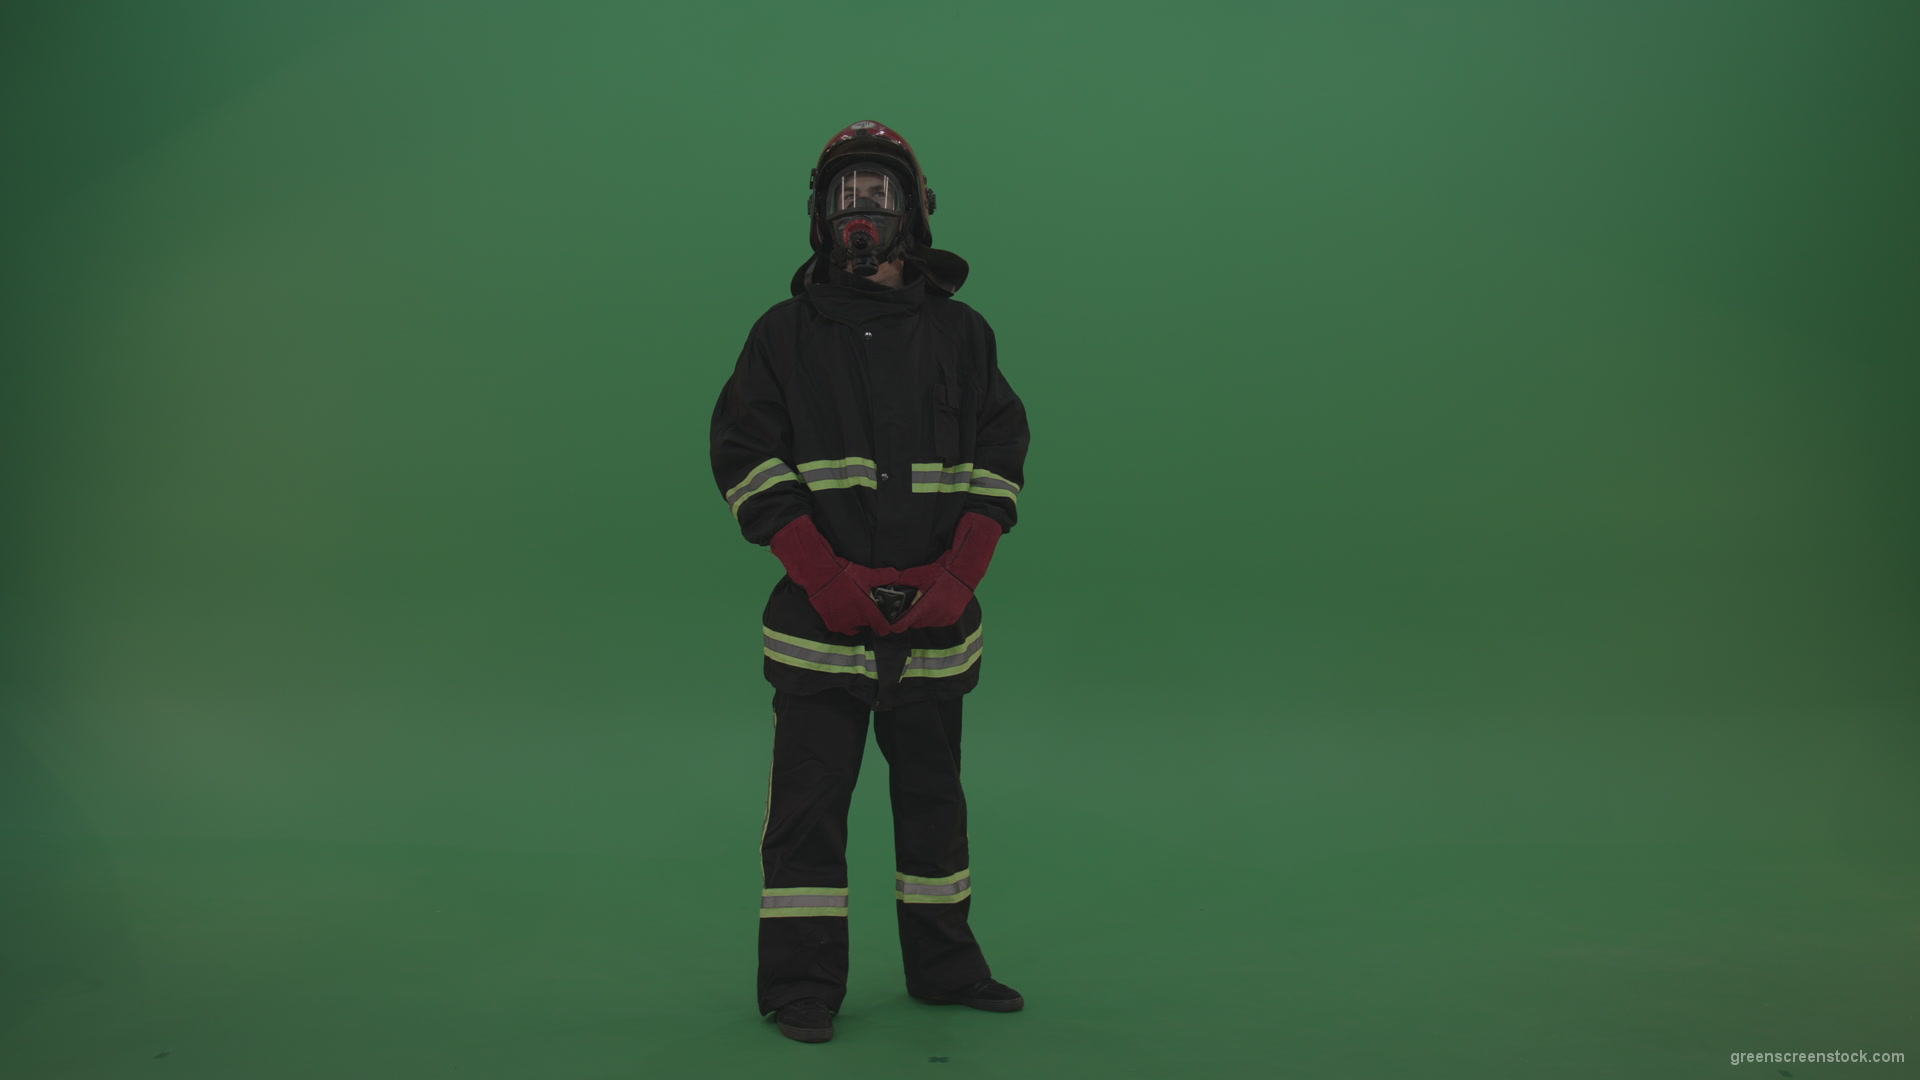 Young_Firefighter_Wearing_Full_FIreman_Working_Kit_Looking_Around_To_Fing_Some_Fire_Arson_Problems_On_Green_Screen_Wall_Background_005 Green Screen Stock